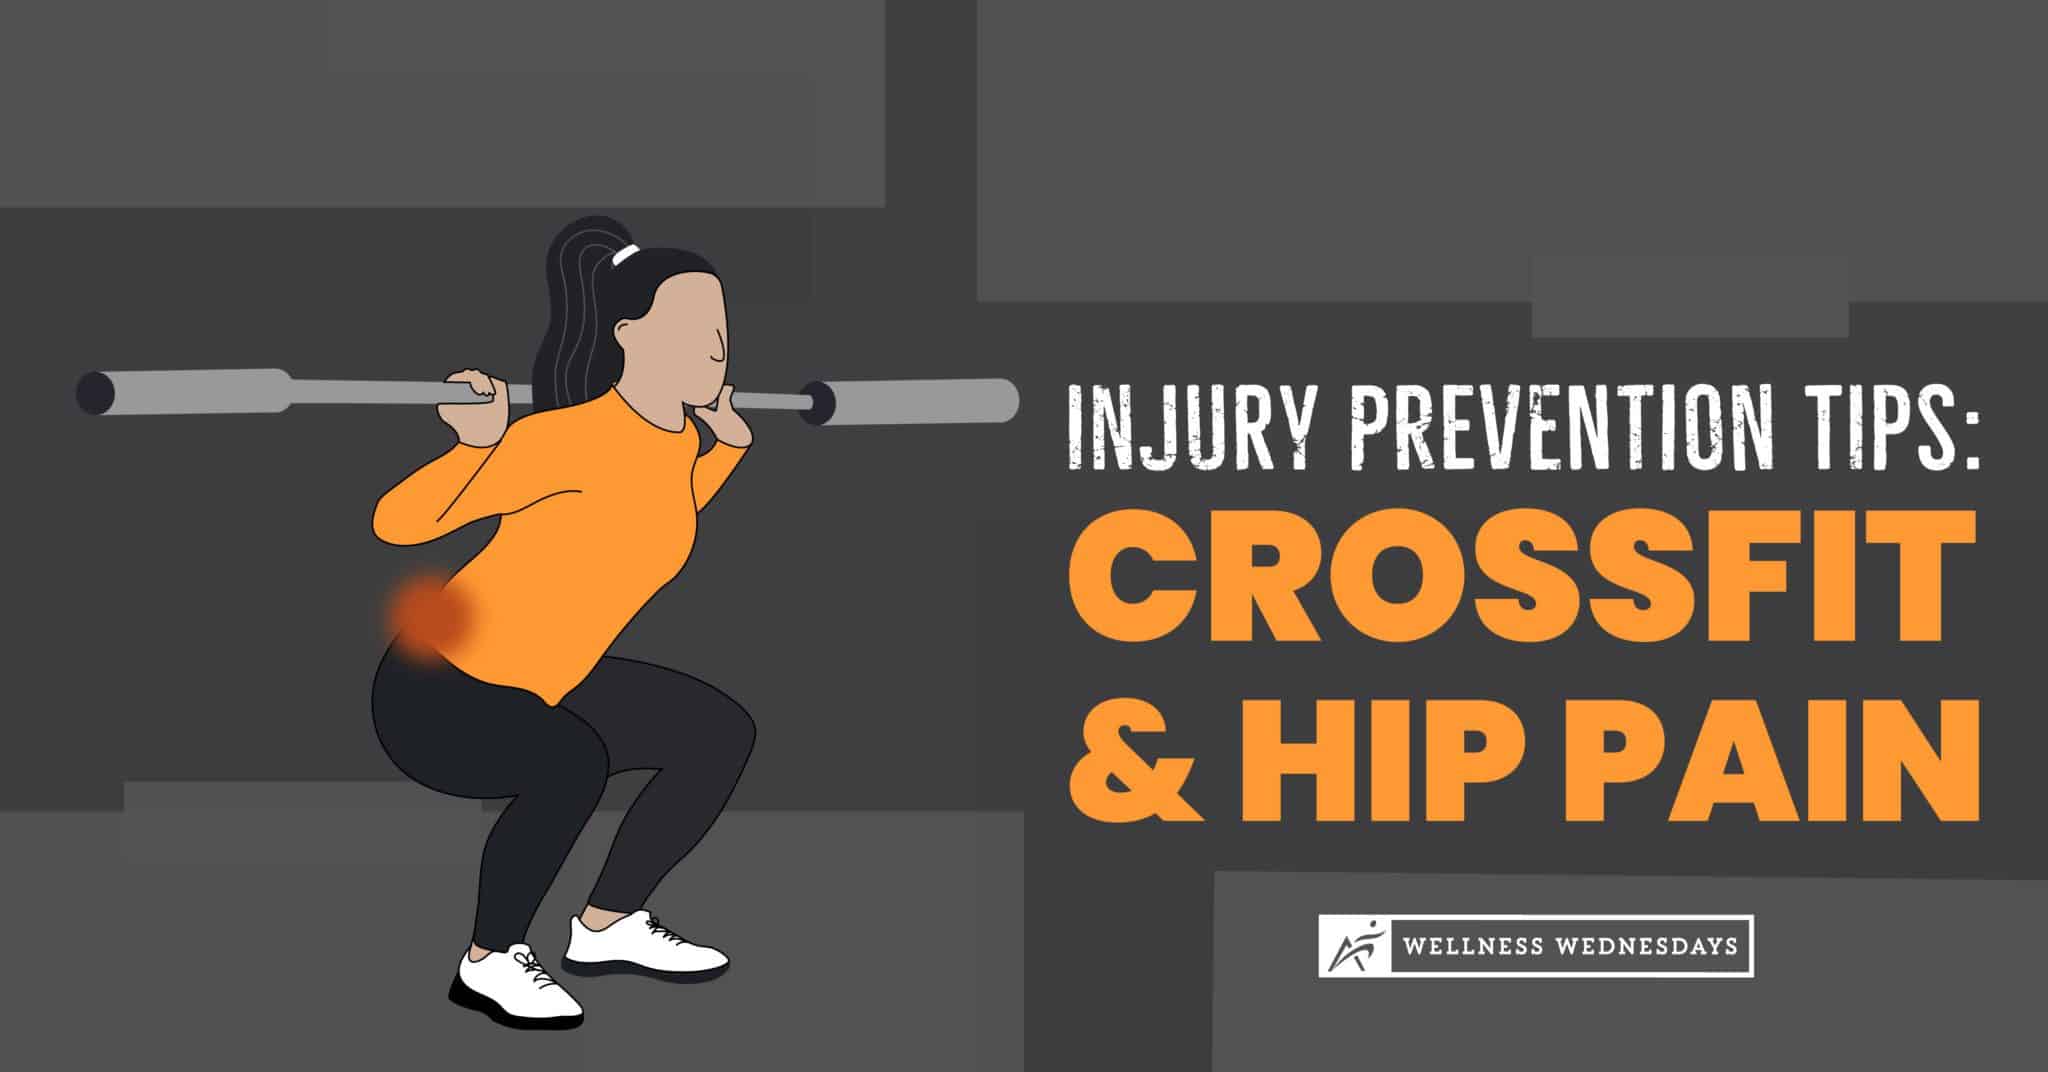 2022_02_Injury Prevention Tips Crossfit and Hip Pain_Blog_Facebook_394322